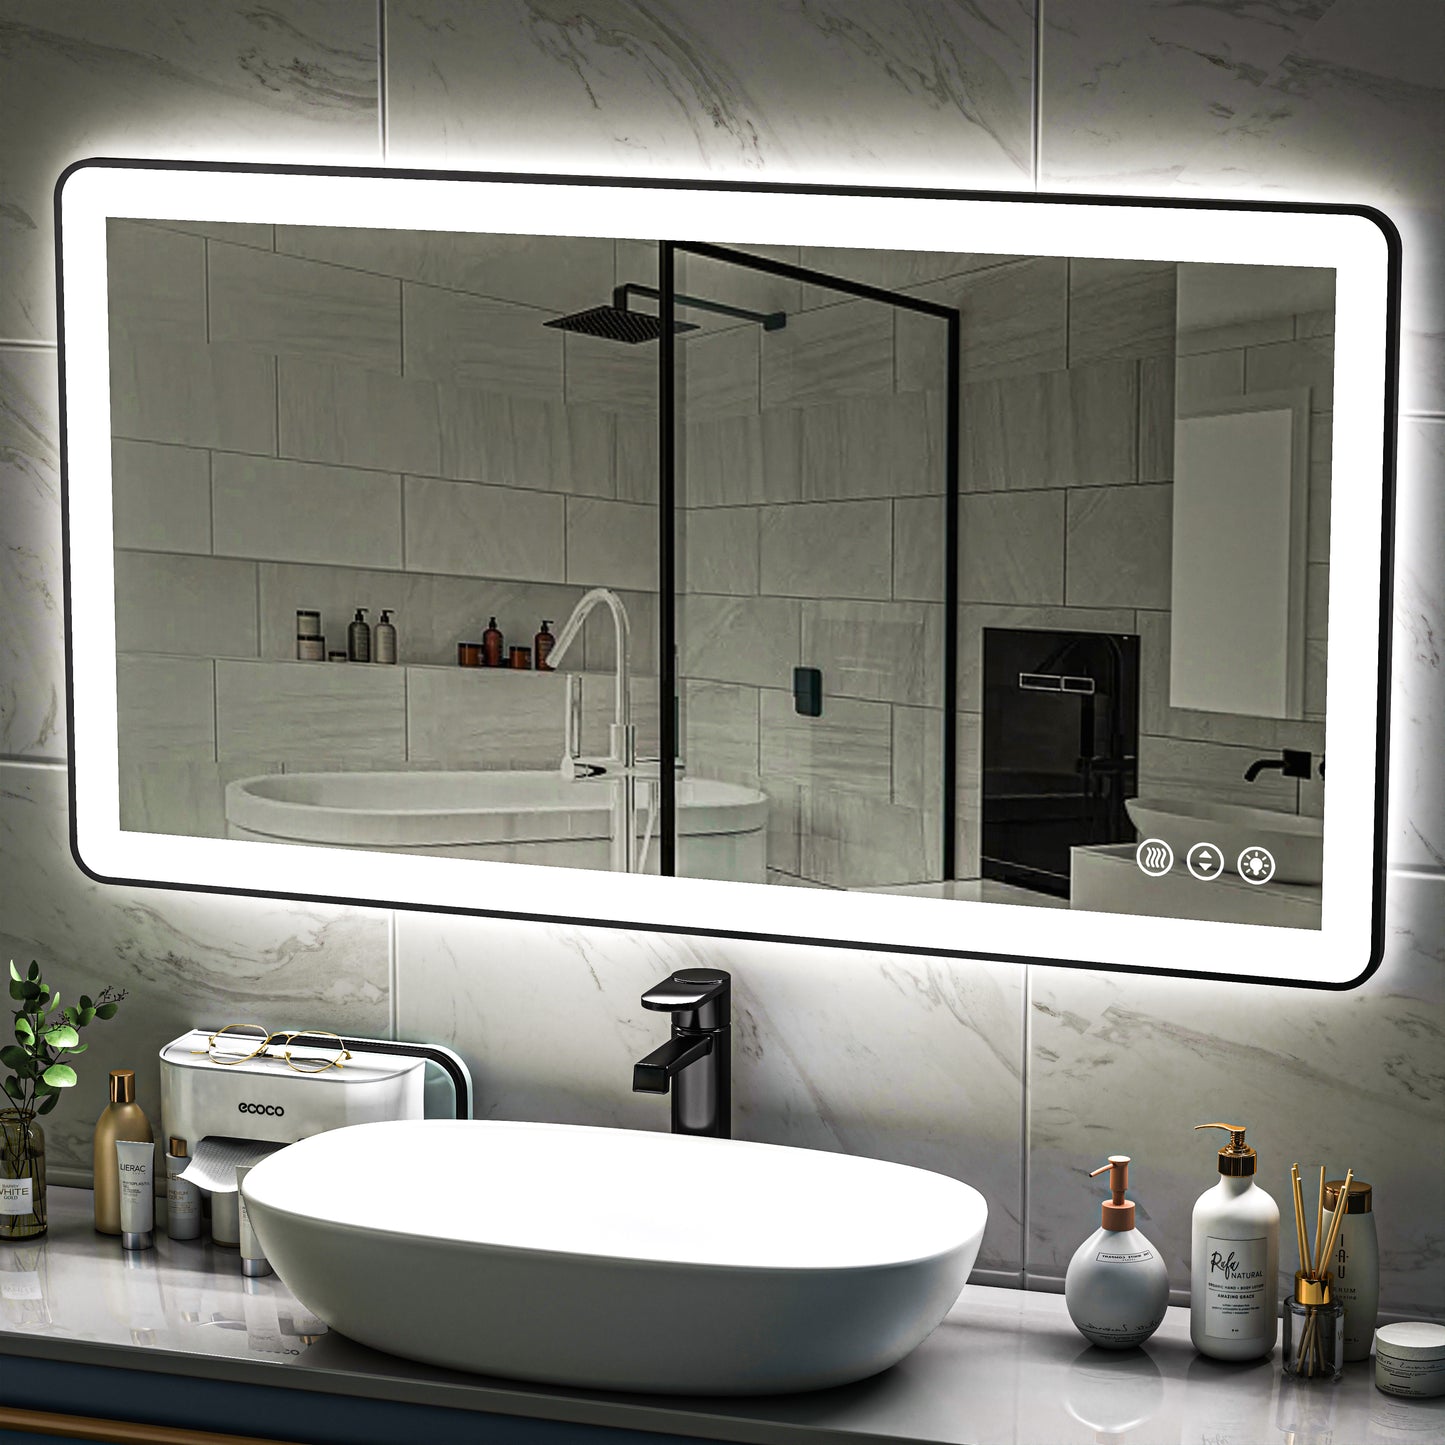 Waterpar® 55 in. W x 30 in. H Rectangular Framed Anti-Fog LED Wall Bathroom Vanity Mirror in Black with Backlit and Front Light